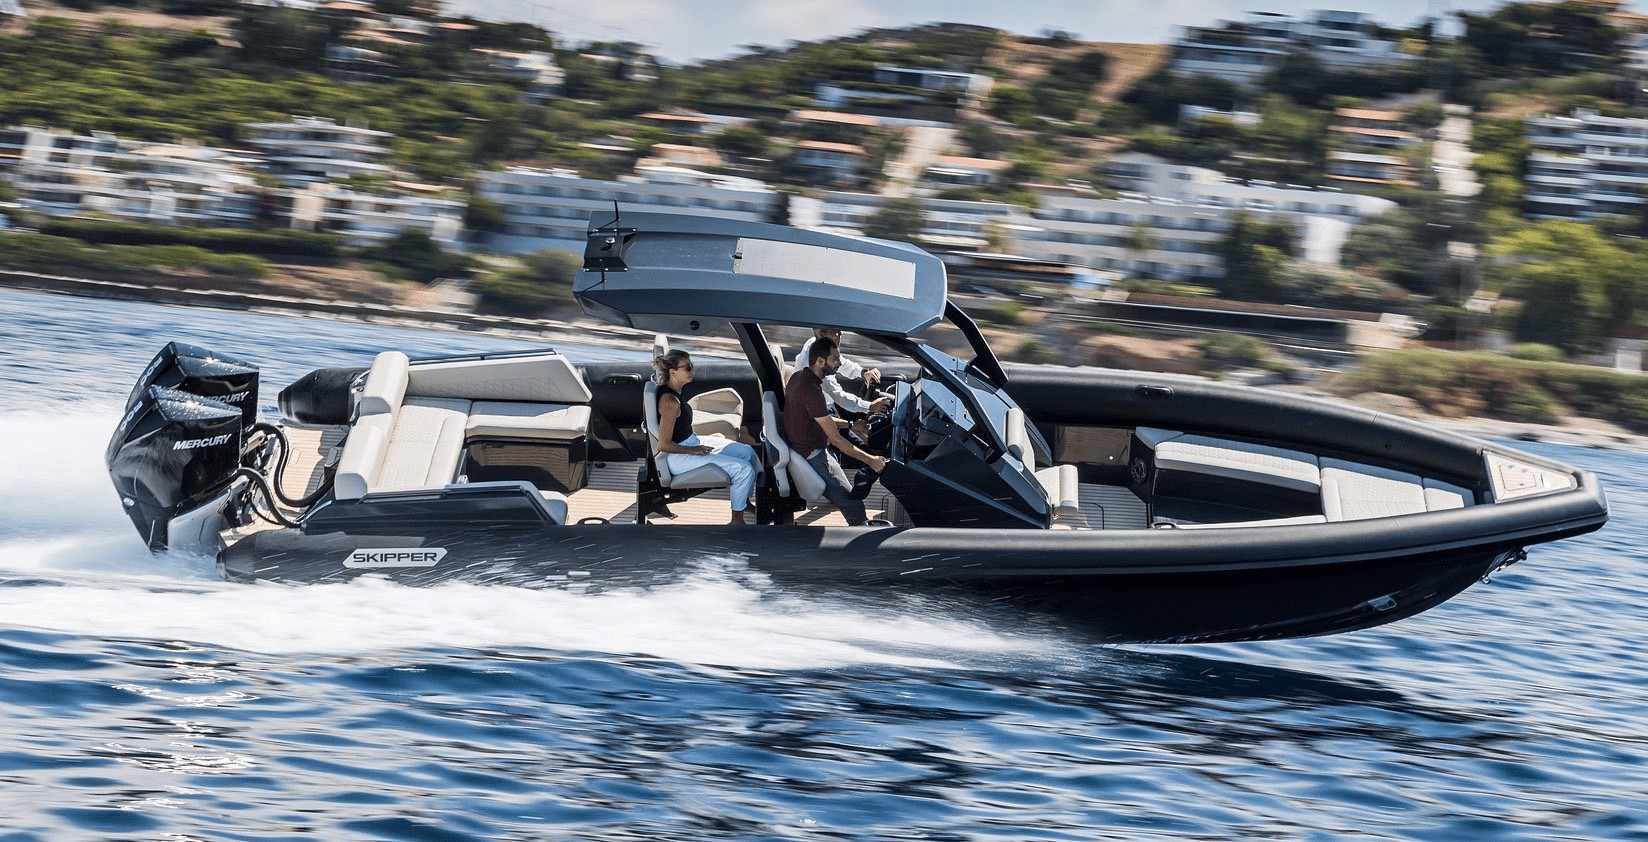 Skipper BSK 34NC RIB @ RIBs ONLY - Home of the Rigid Inflatable Boat